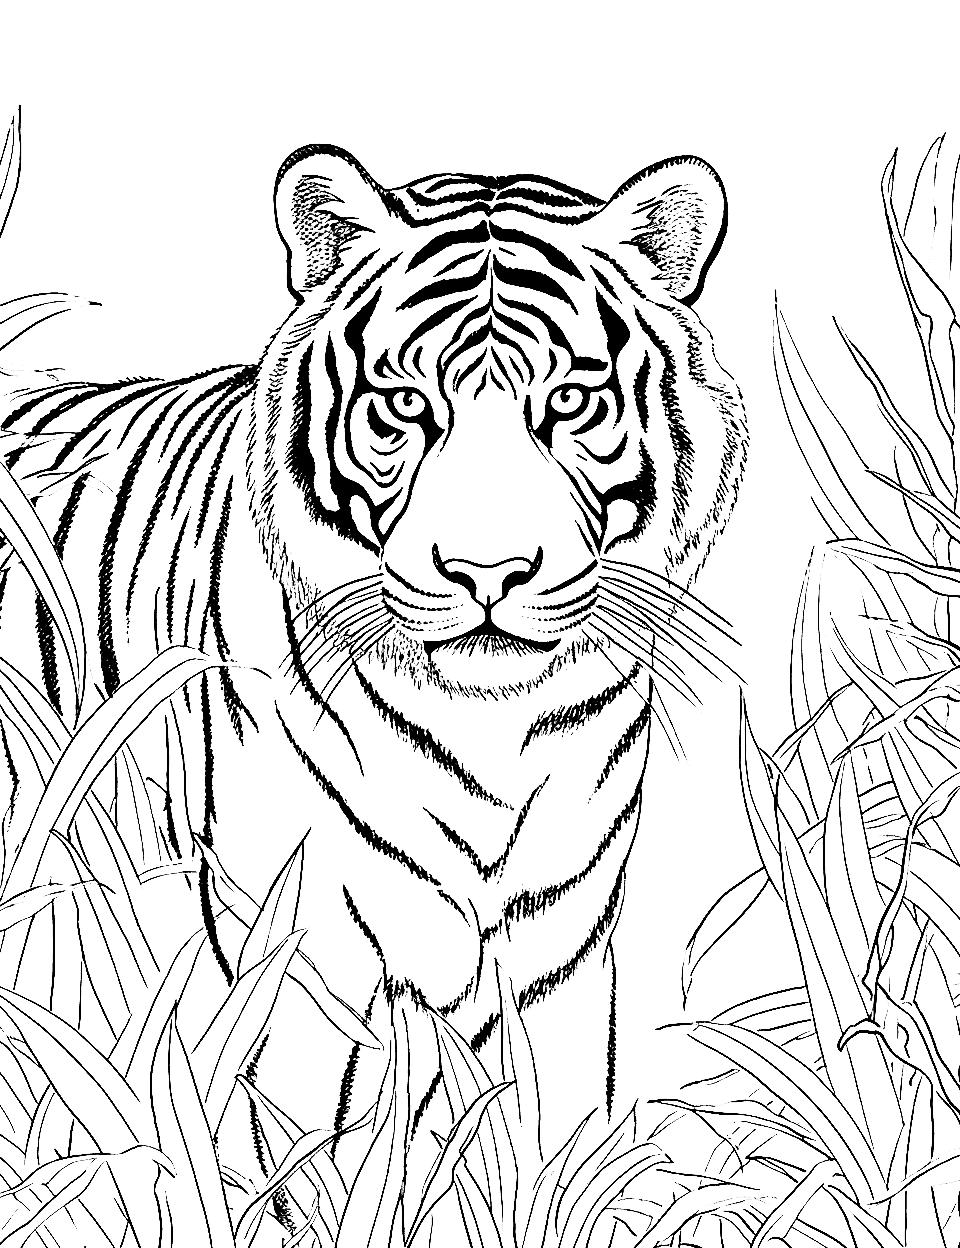 Camouflaged Stripes Tiger Coloring Page - A tiger blending seamlessly into its jungle surroundings.